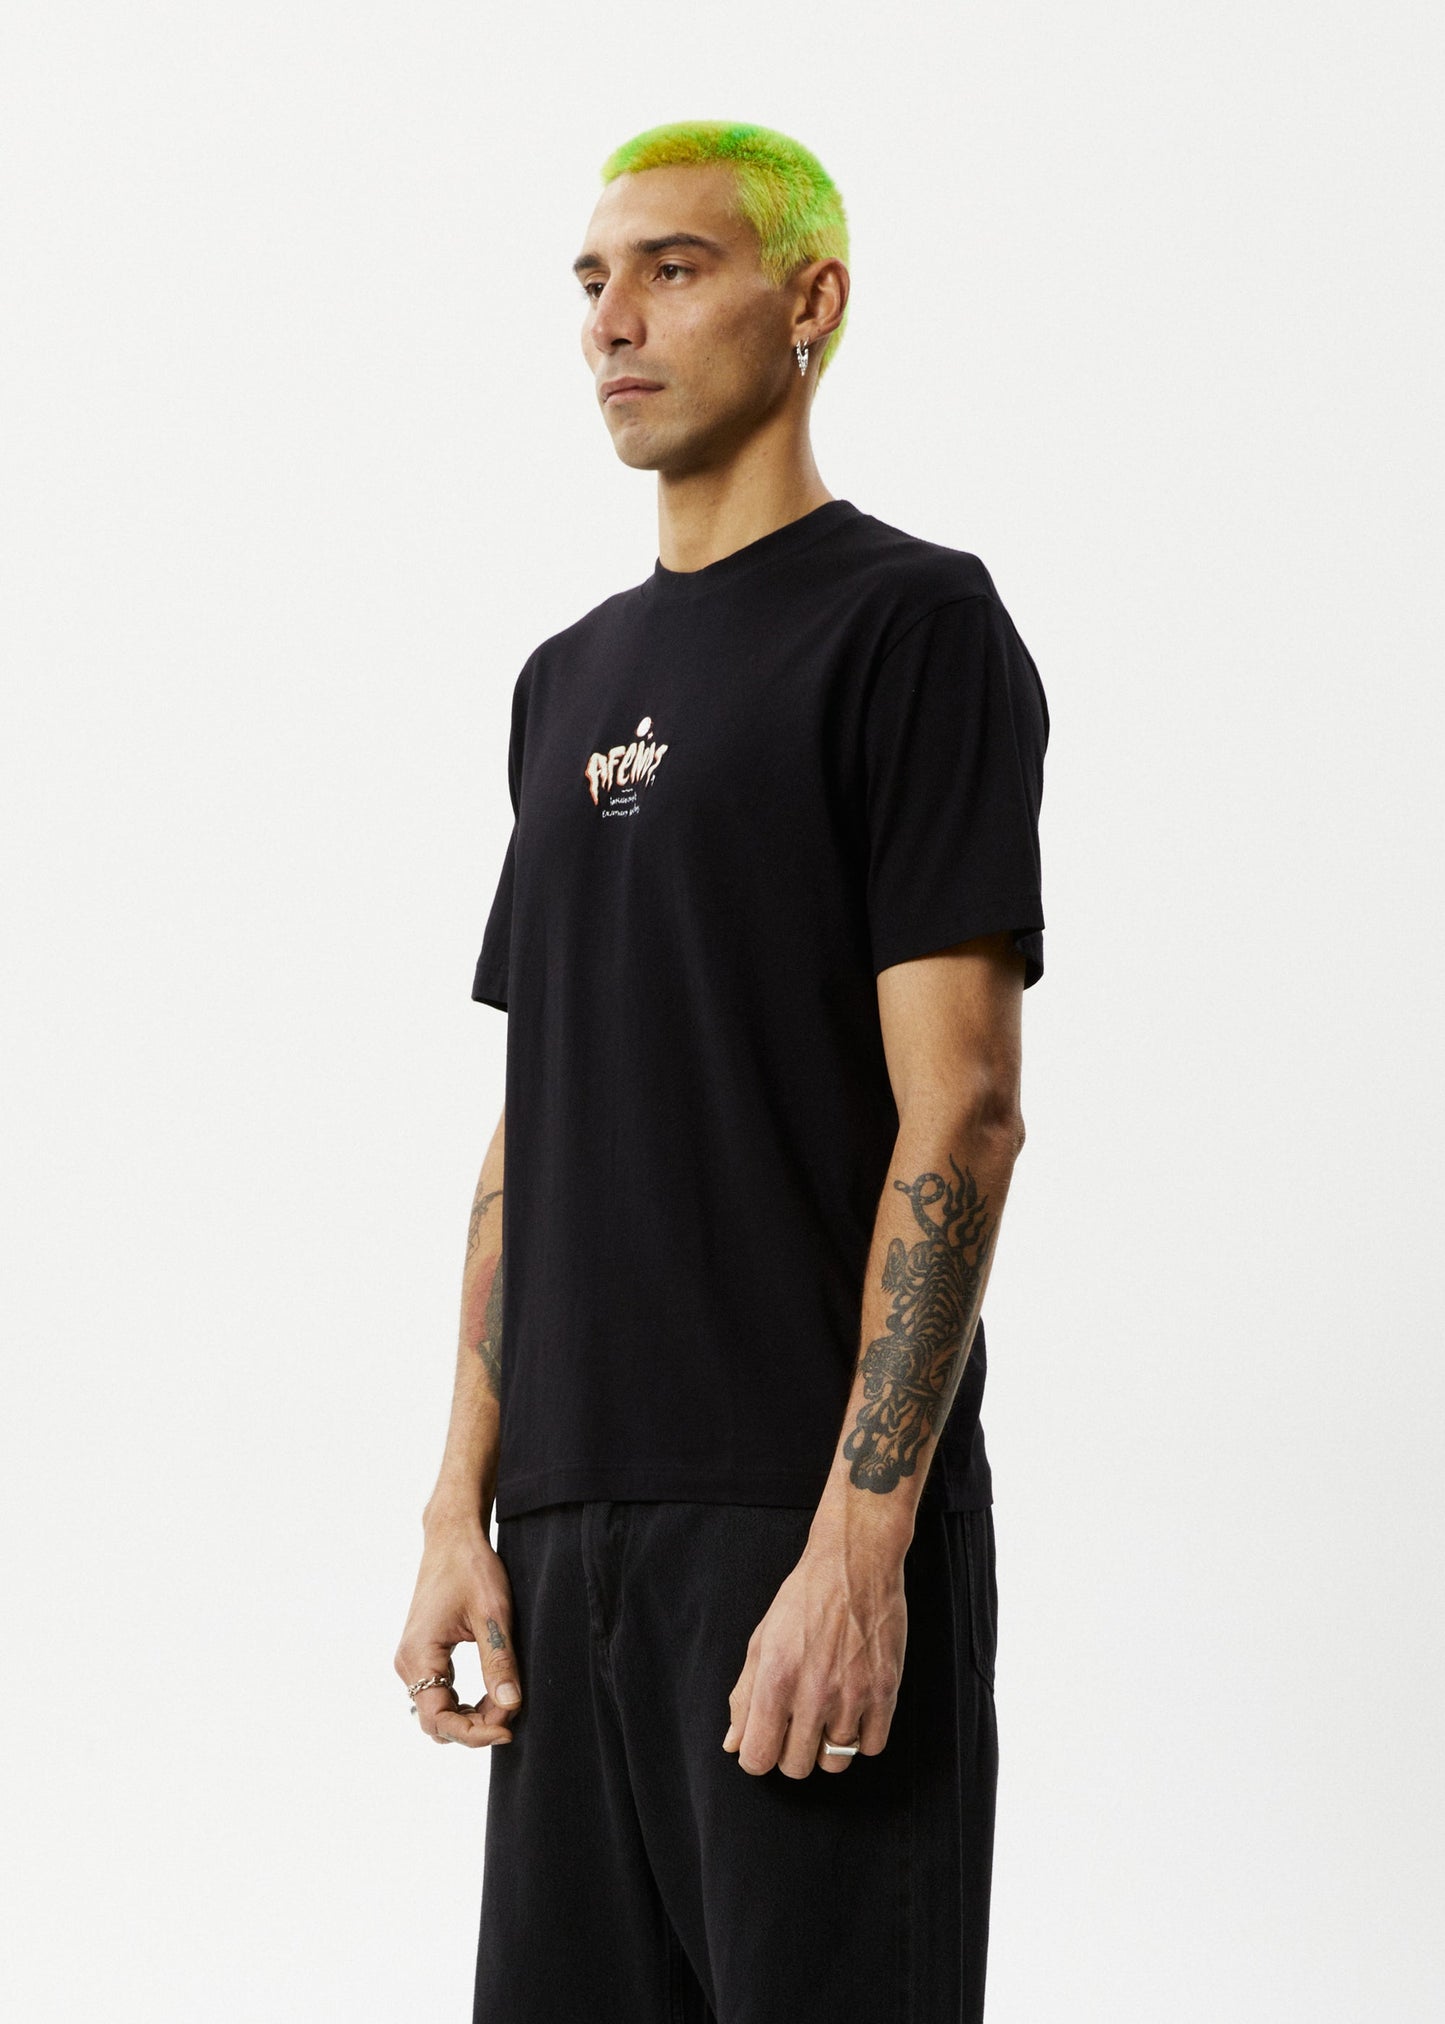 Enjoyment Recycled Retro Fit Tee